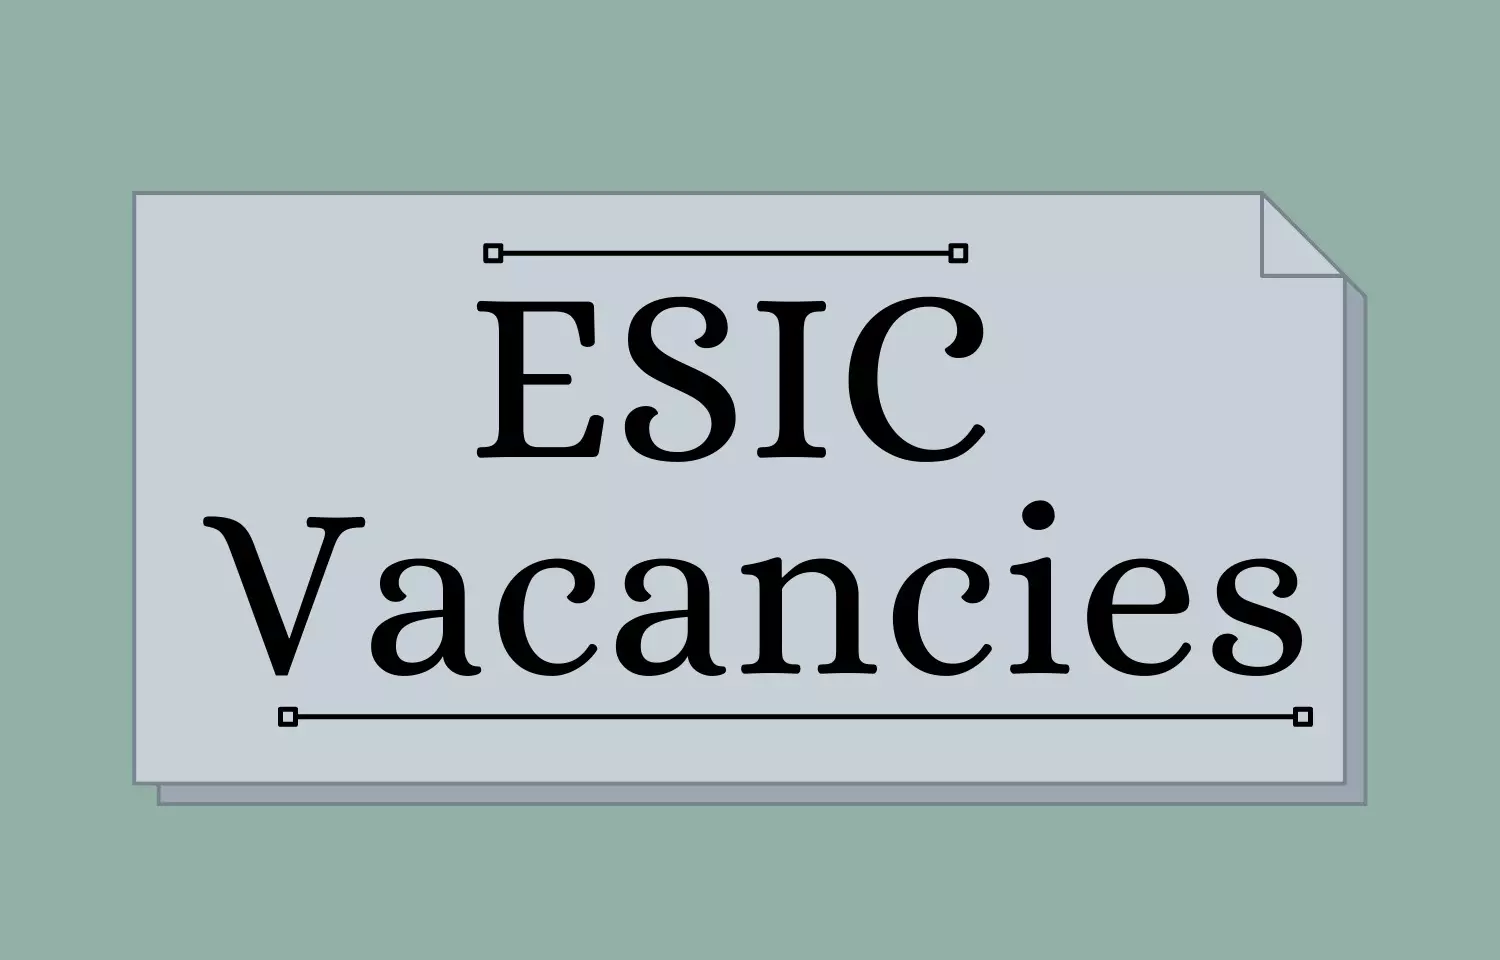 Walk In Interview At ESIC Medical College and Hospital Kolkata: 36 Vacancies For Senior Resident In Various Specialities, Details Here